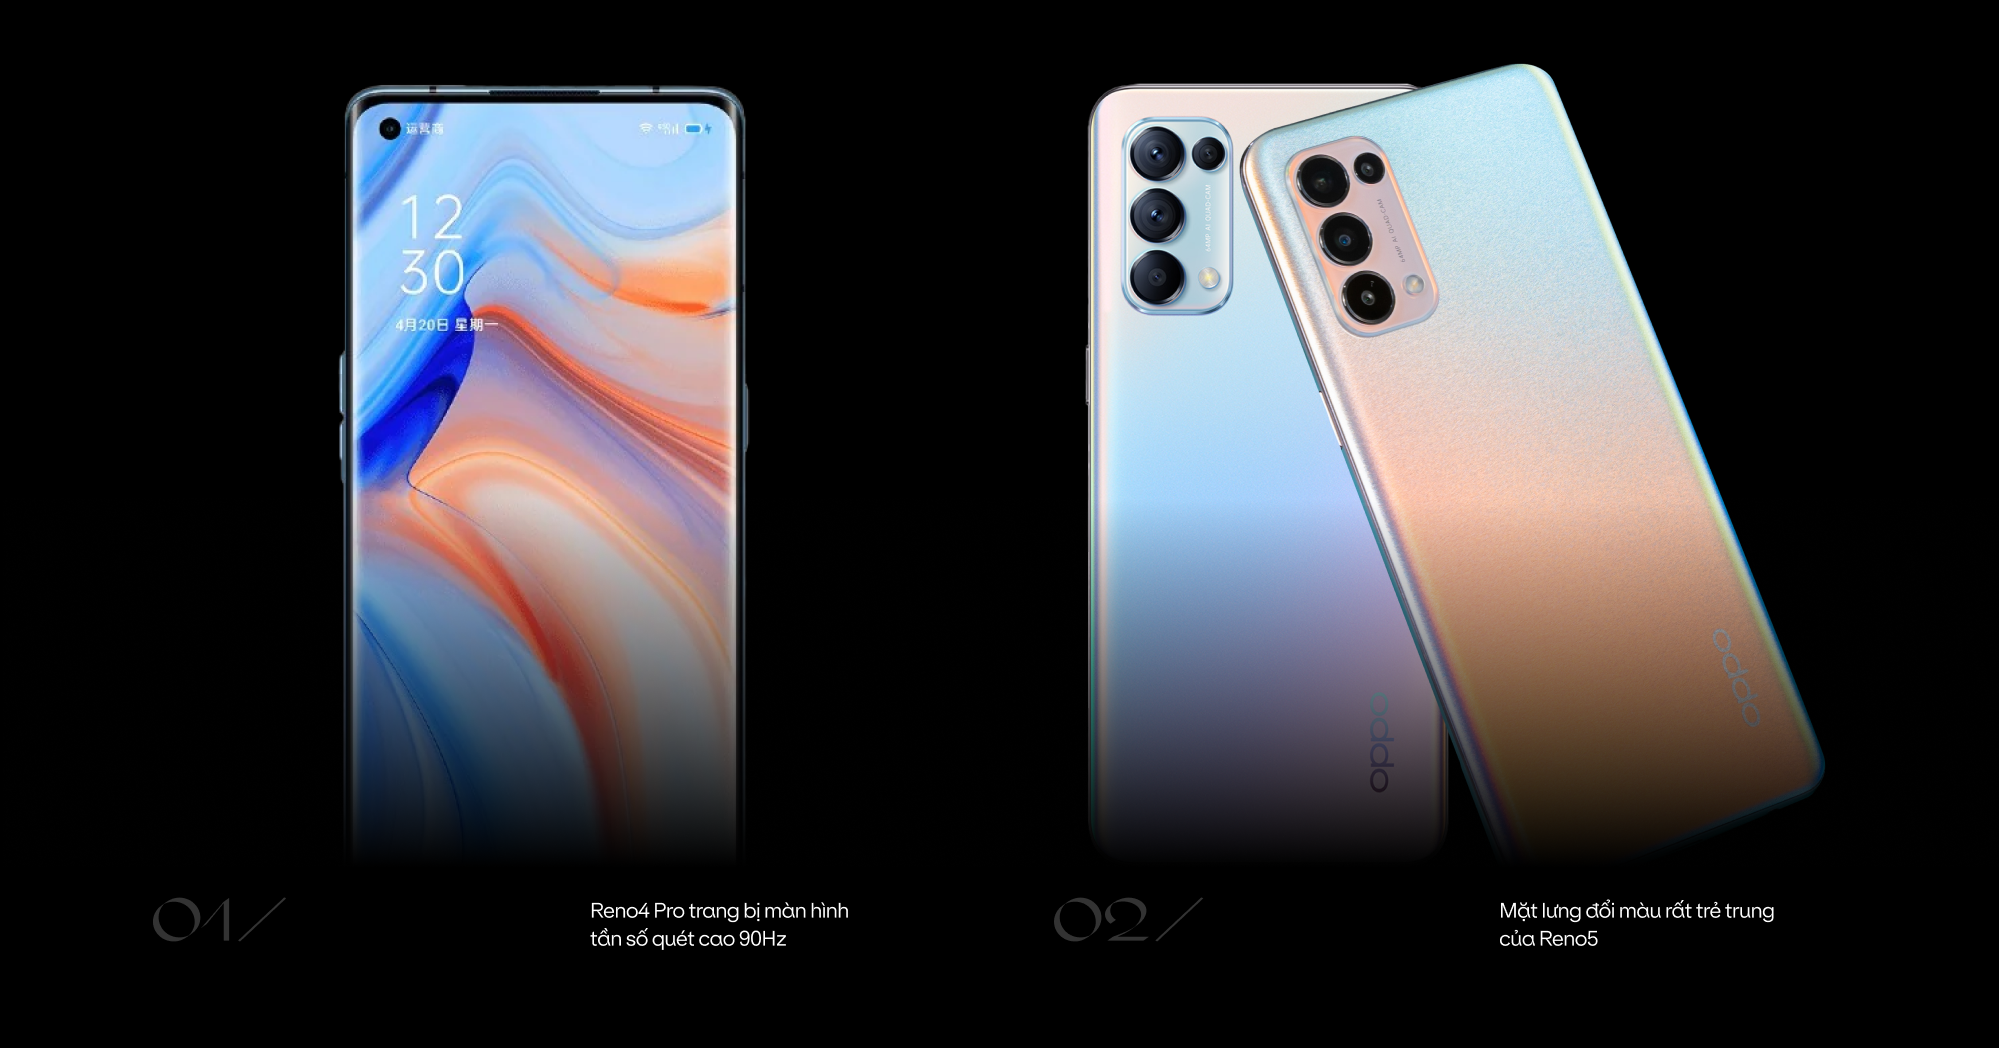 4 years and 10 years of OPPO Reno: looking at the ultra-fast development of smartphones with young people - Photo 9.